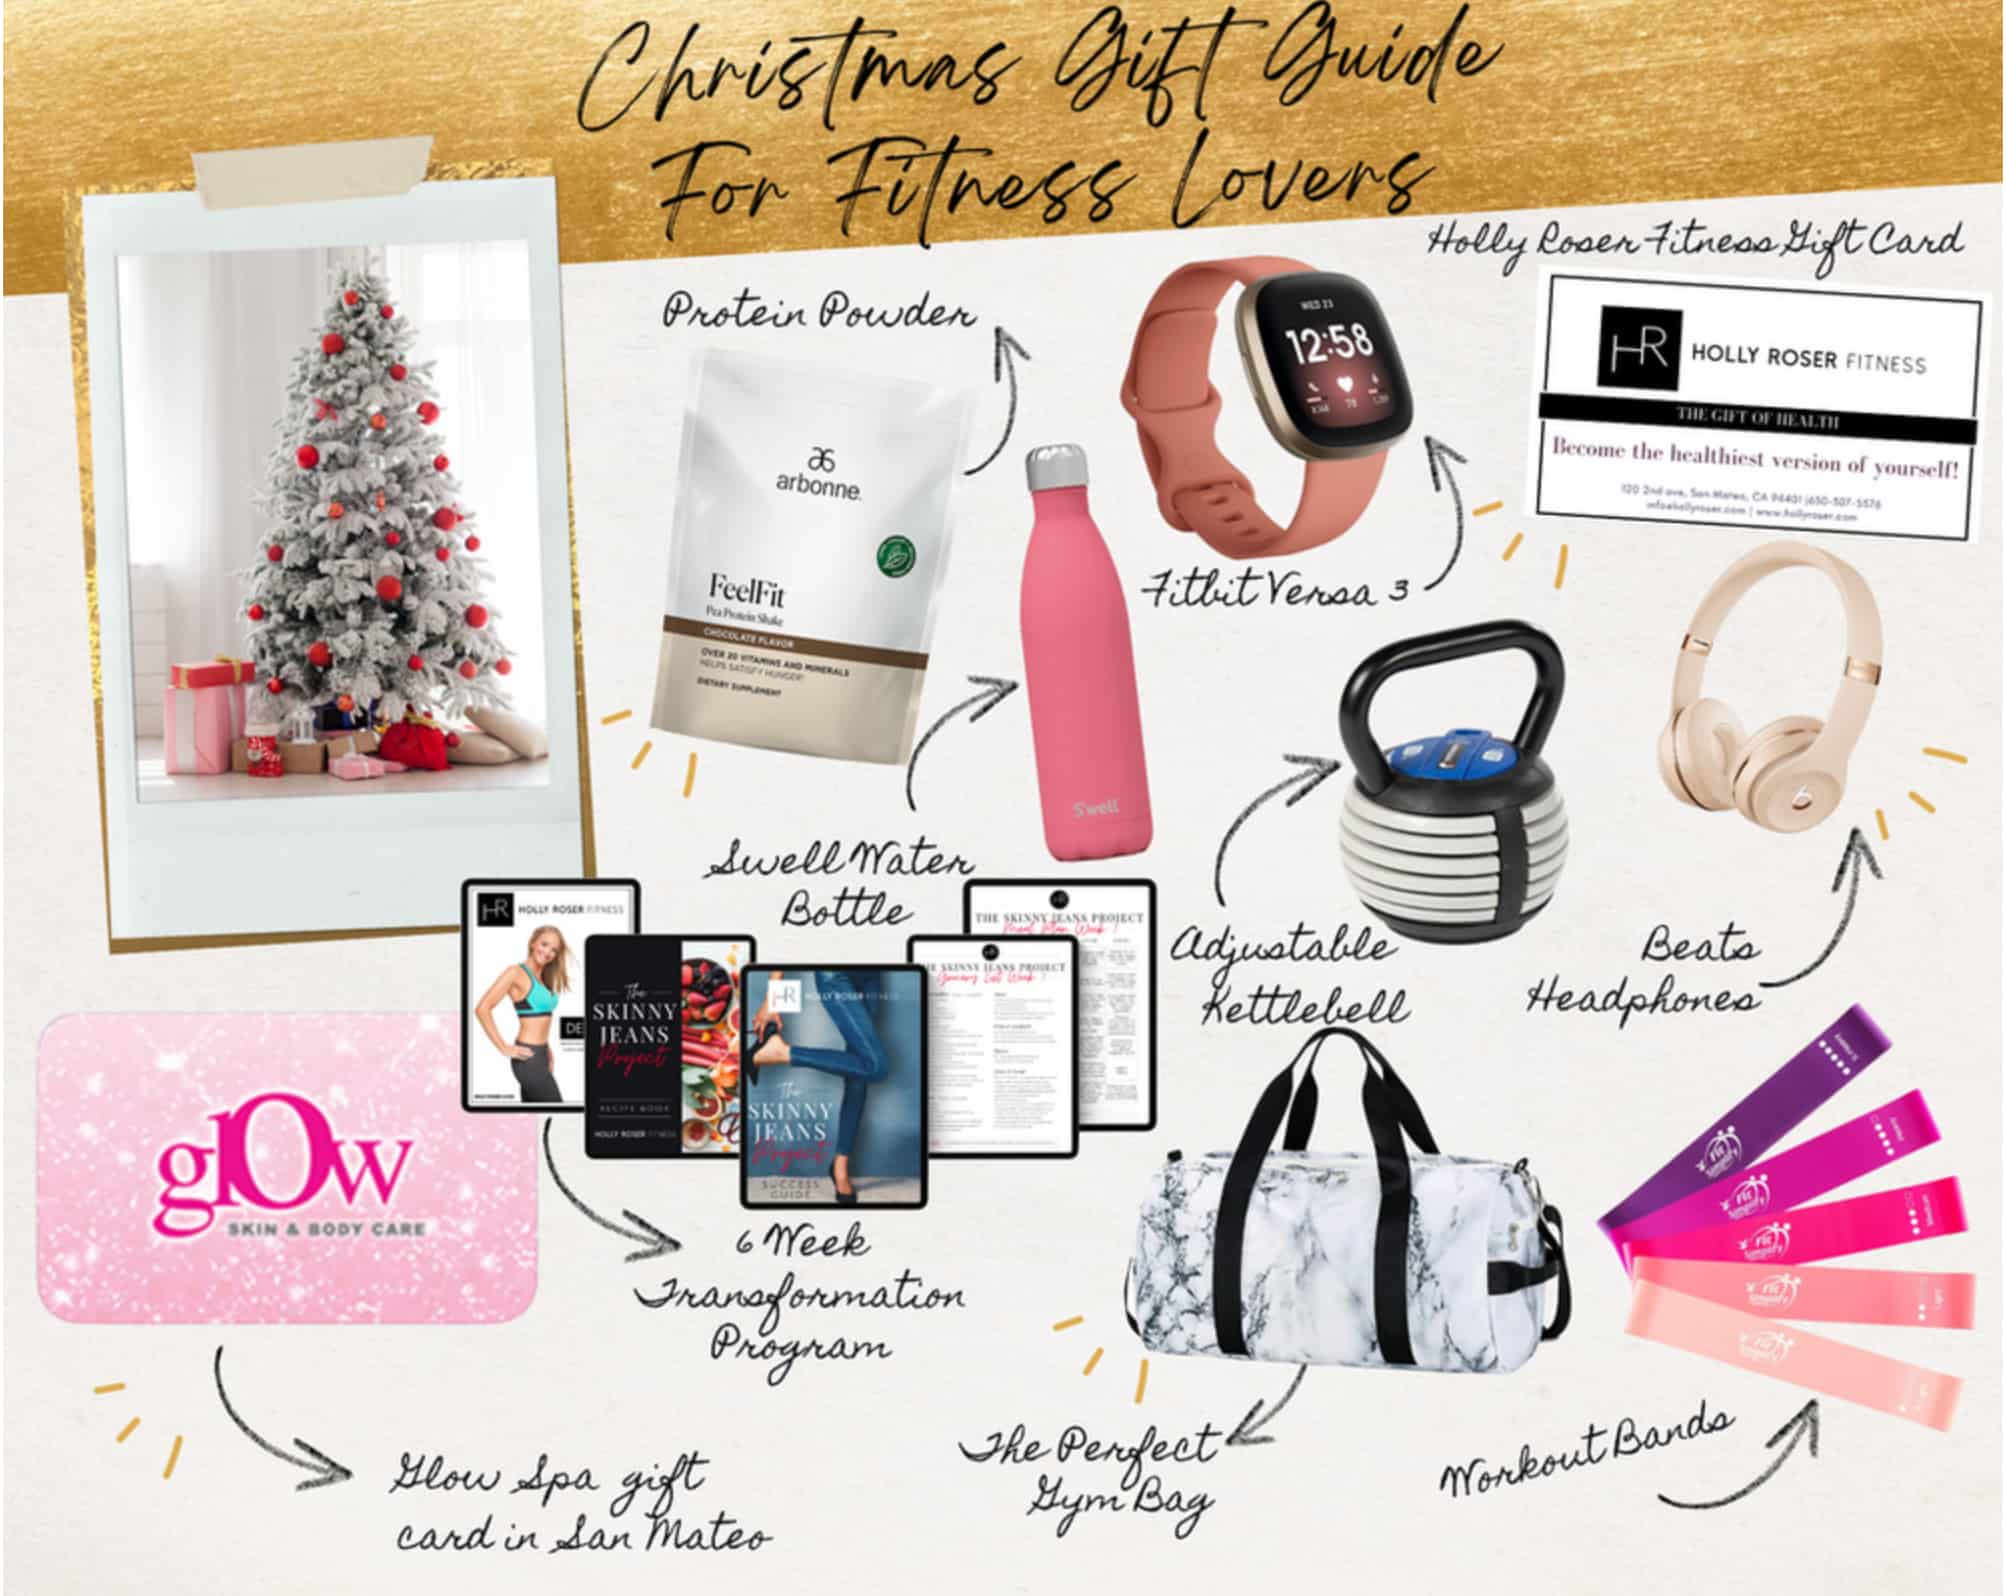 Ultimate Holiday Gift Guide for the Health & Fitness Lover